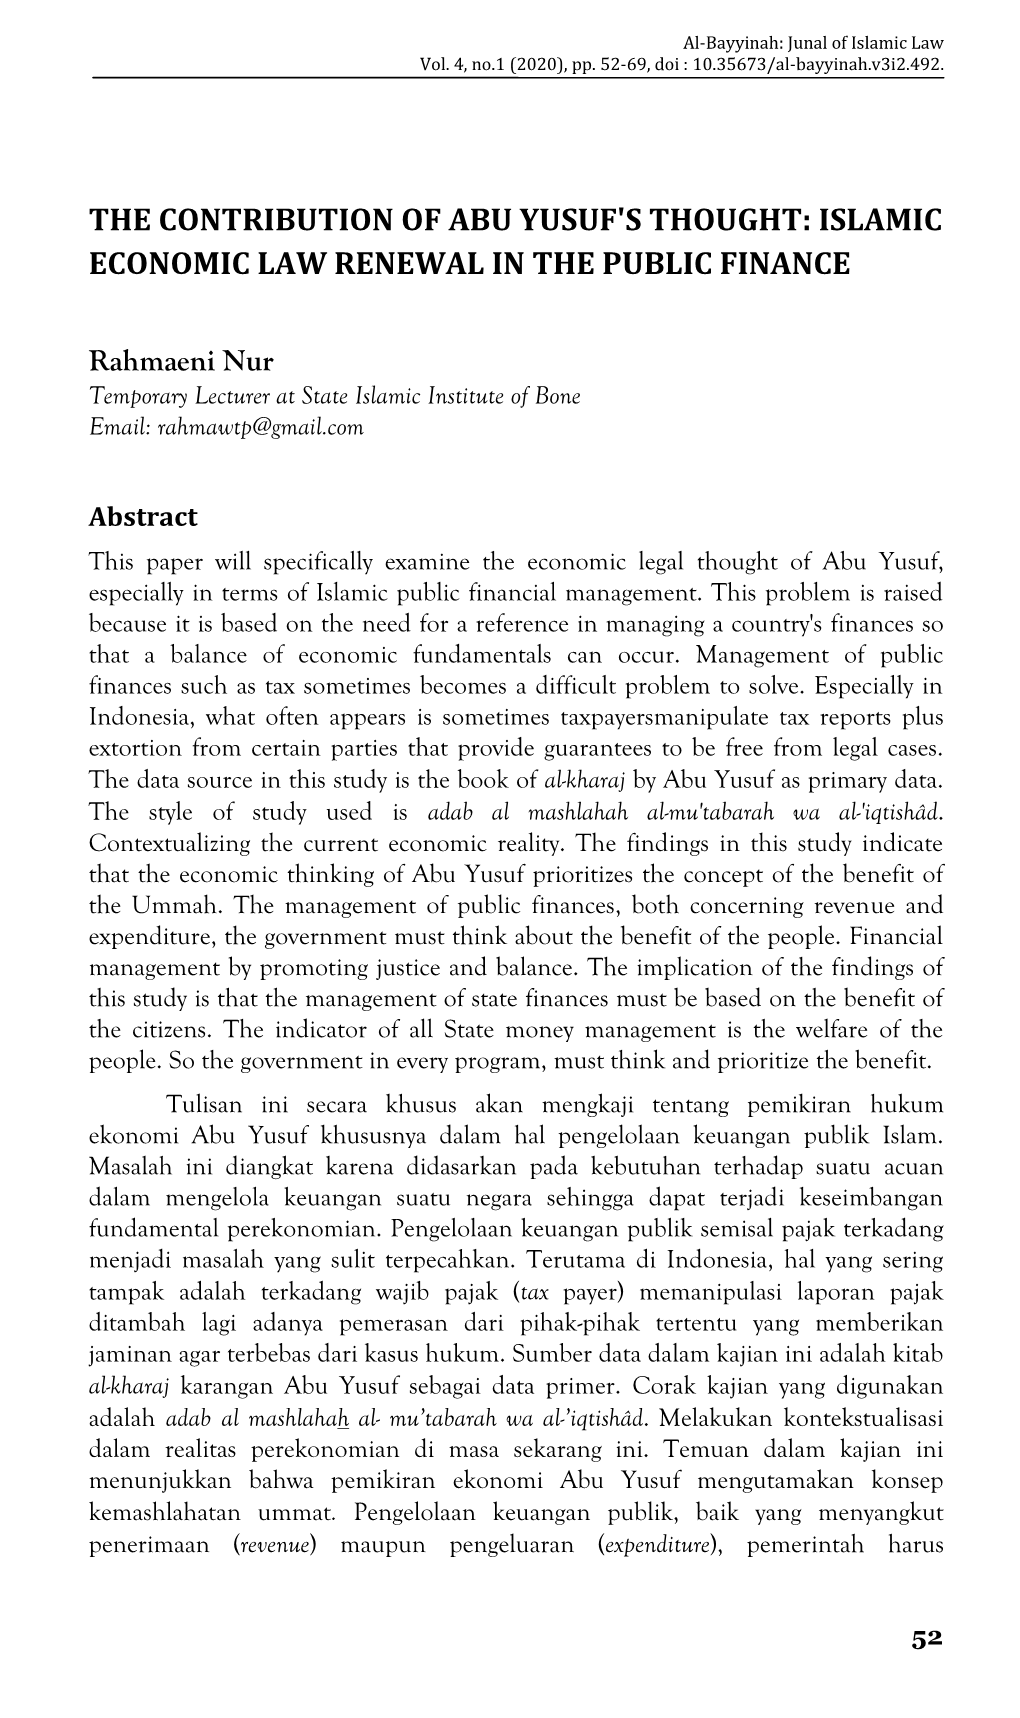 The Contribution of Abu Yusuf's Thought: Islamic Economic Law Renewal in the Public Finance